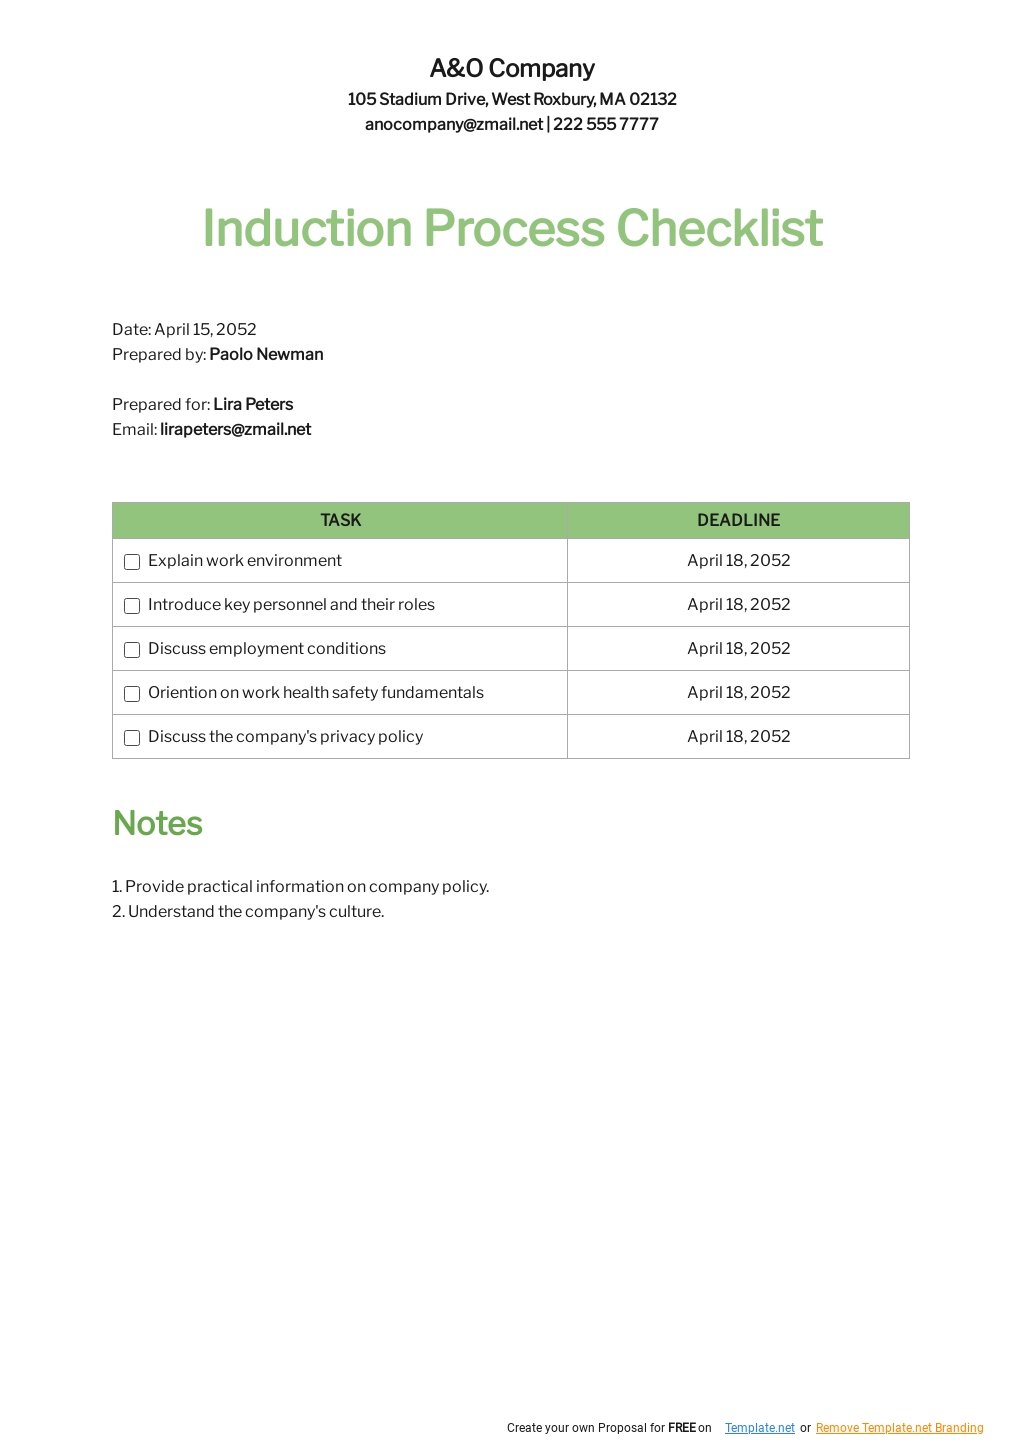 Induction Process Checklist Template